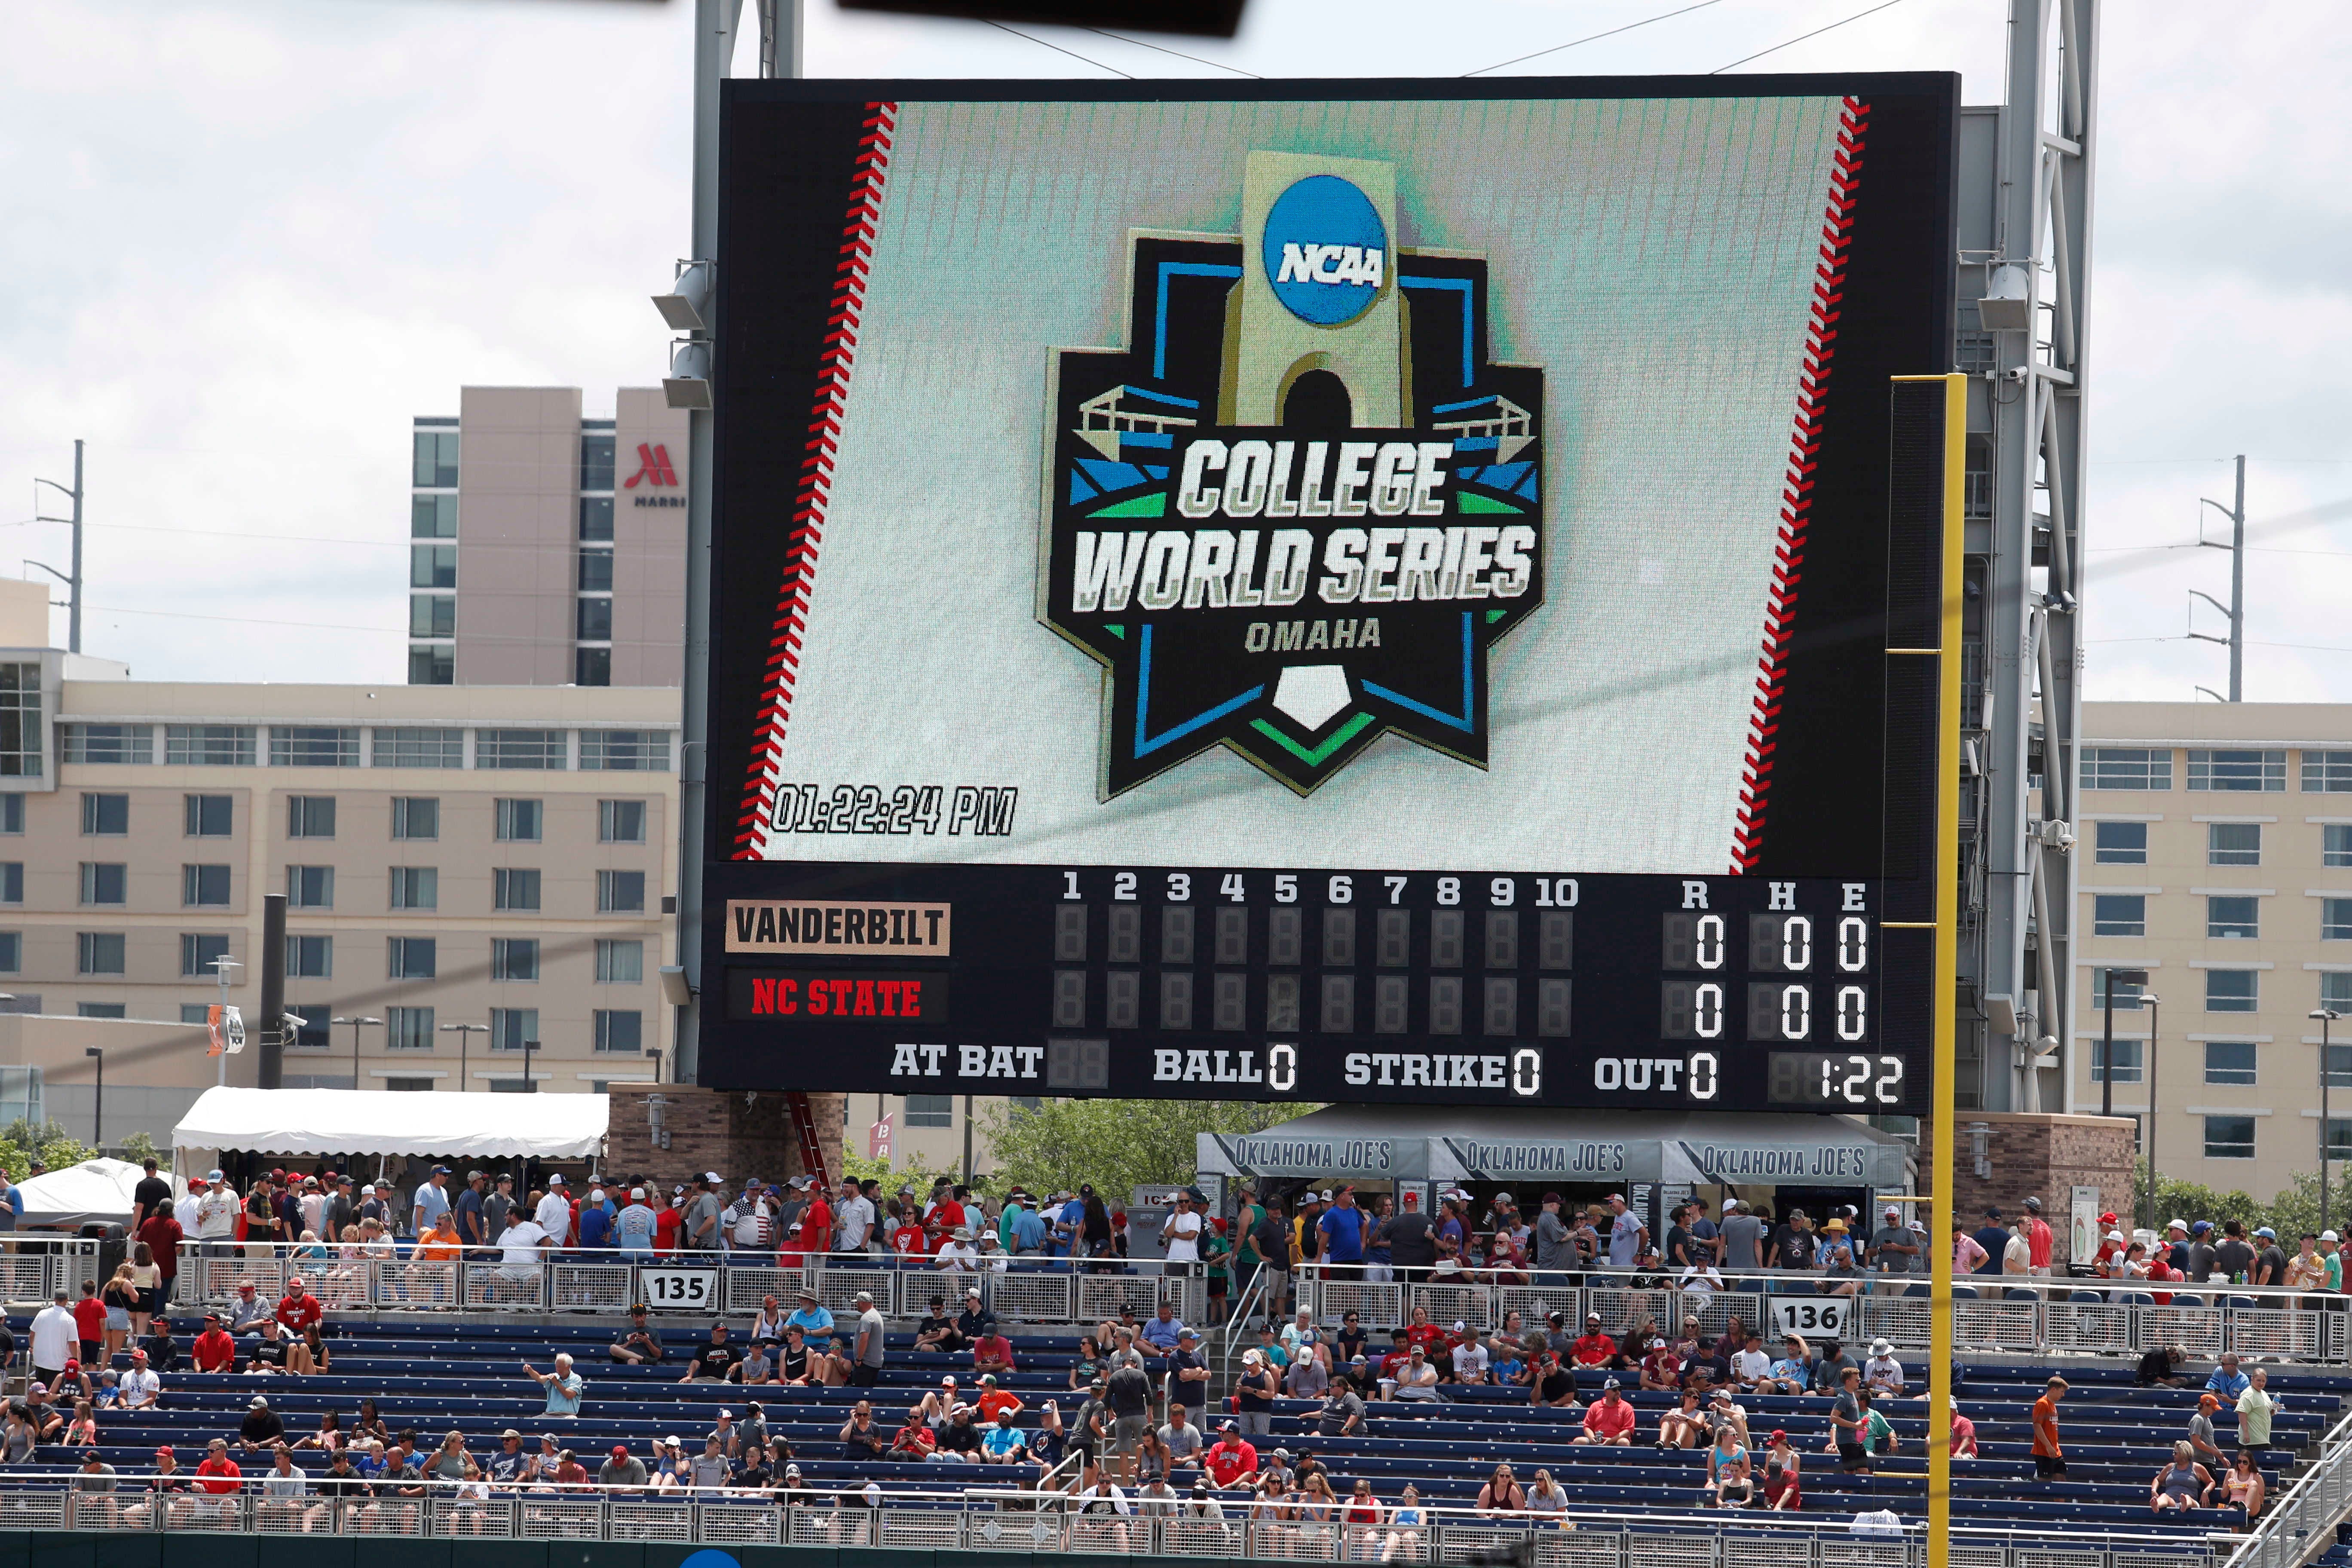 Best wishes to the Vandy Boys at the College World Series